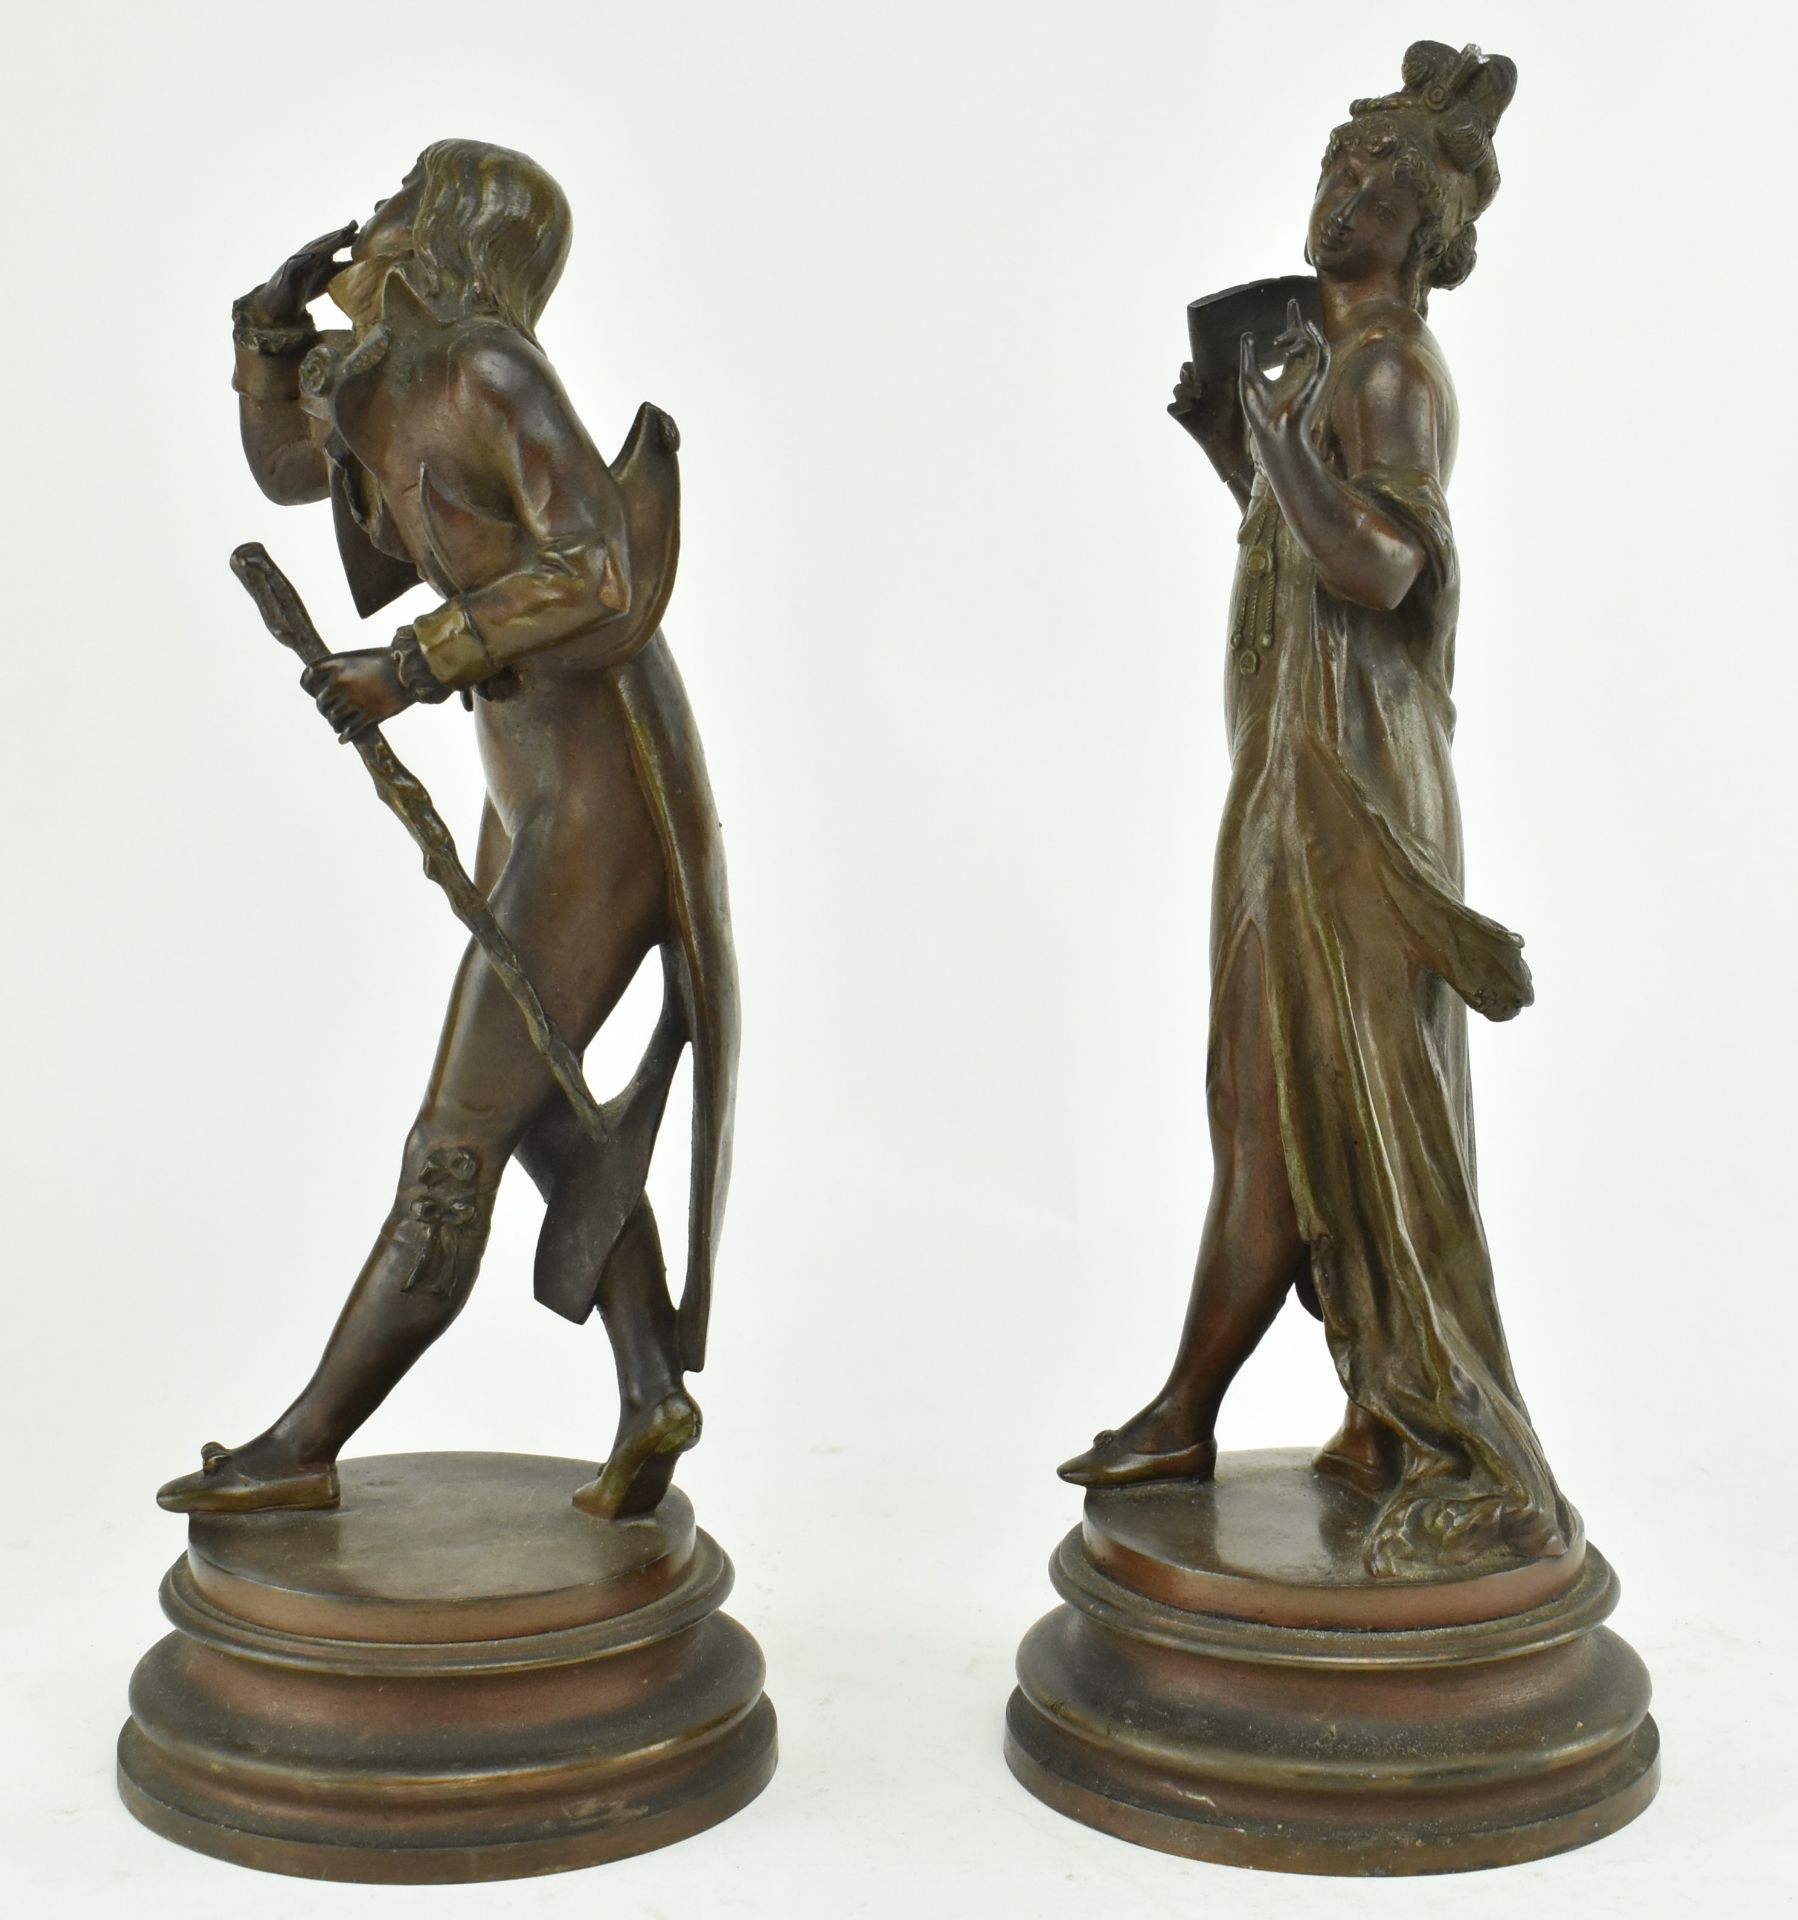 PAIR OF 19TH CENTURY BRONZE SPELTER FIGURES OF COUPLE - Image 5 of 6